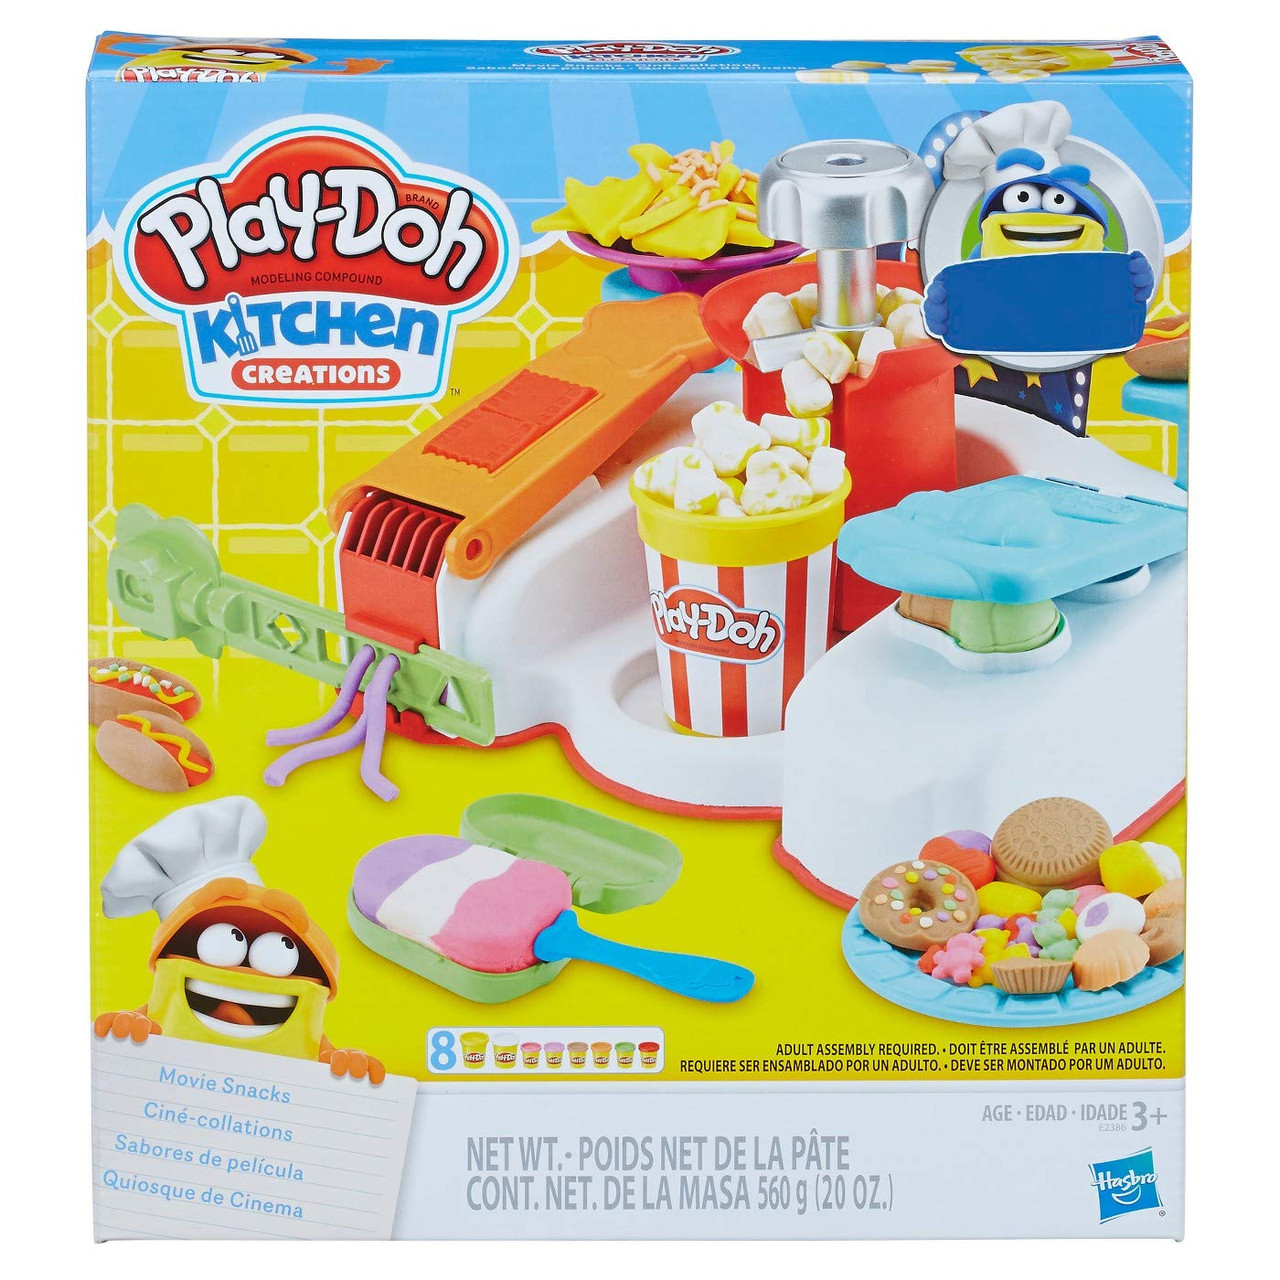 Play-Doh Kitchen Creations Toaster Creations Modeling Play Set